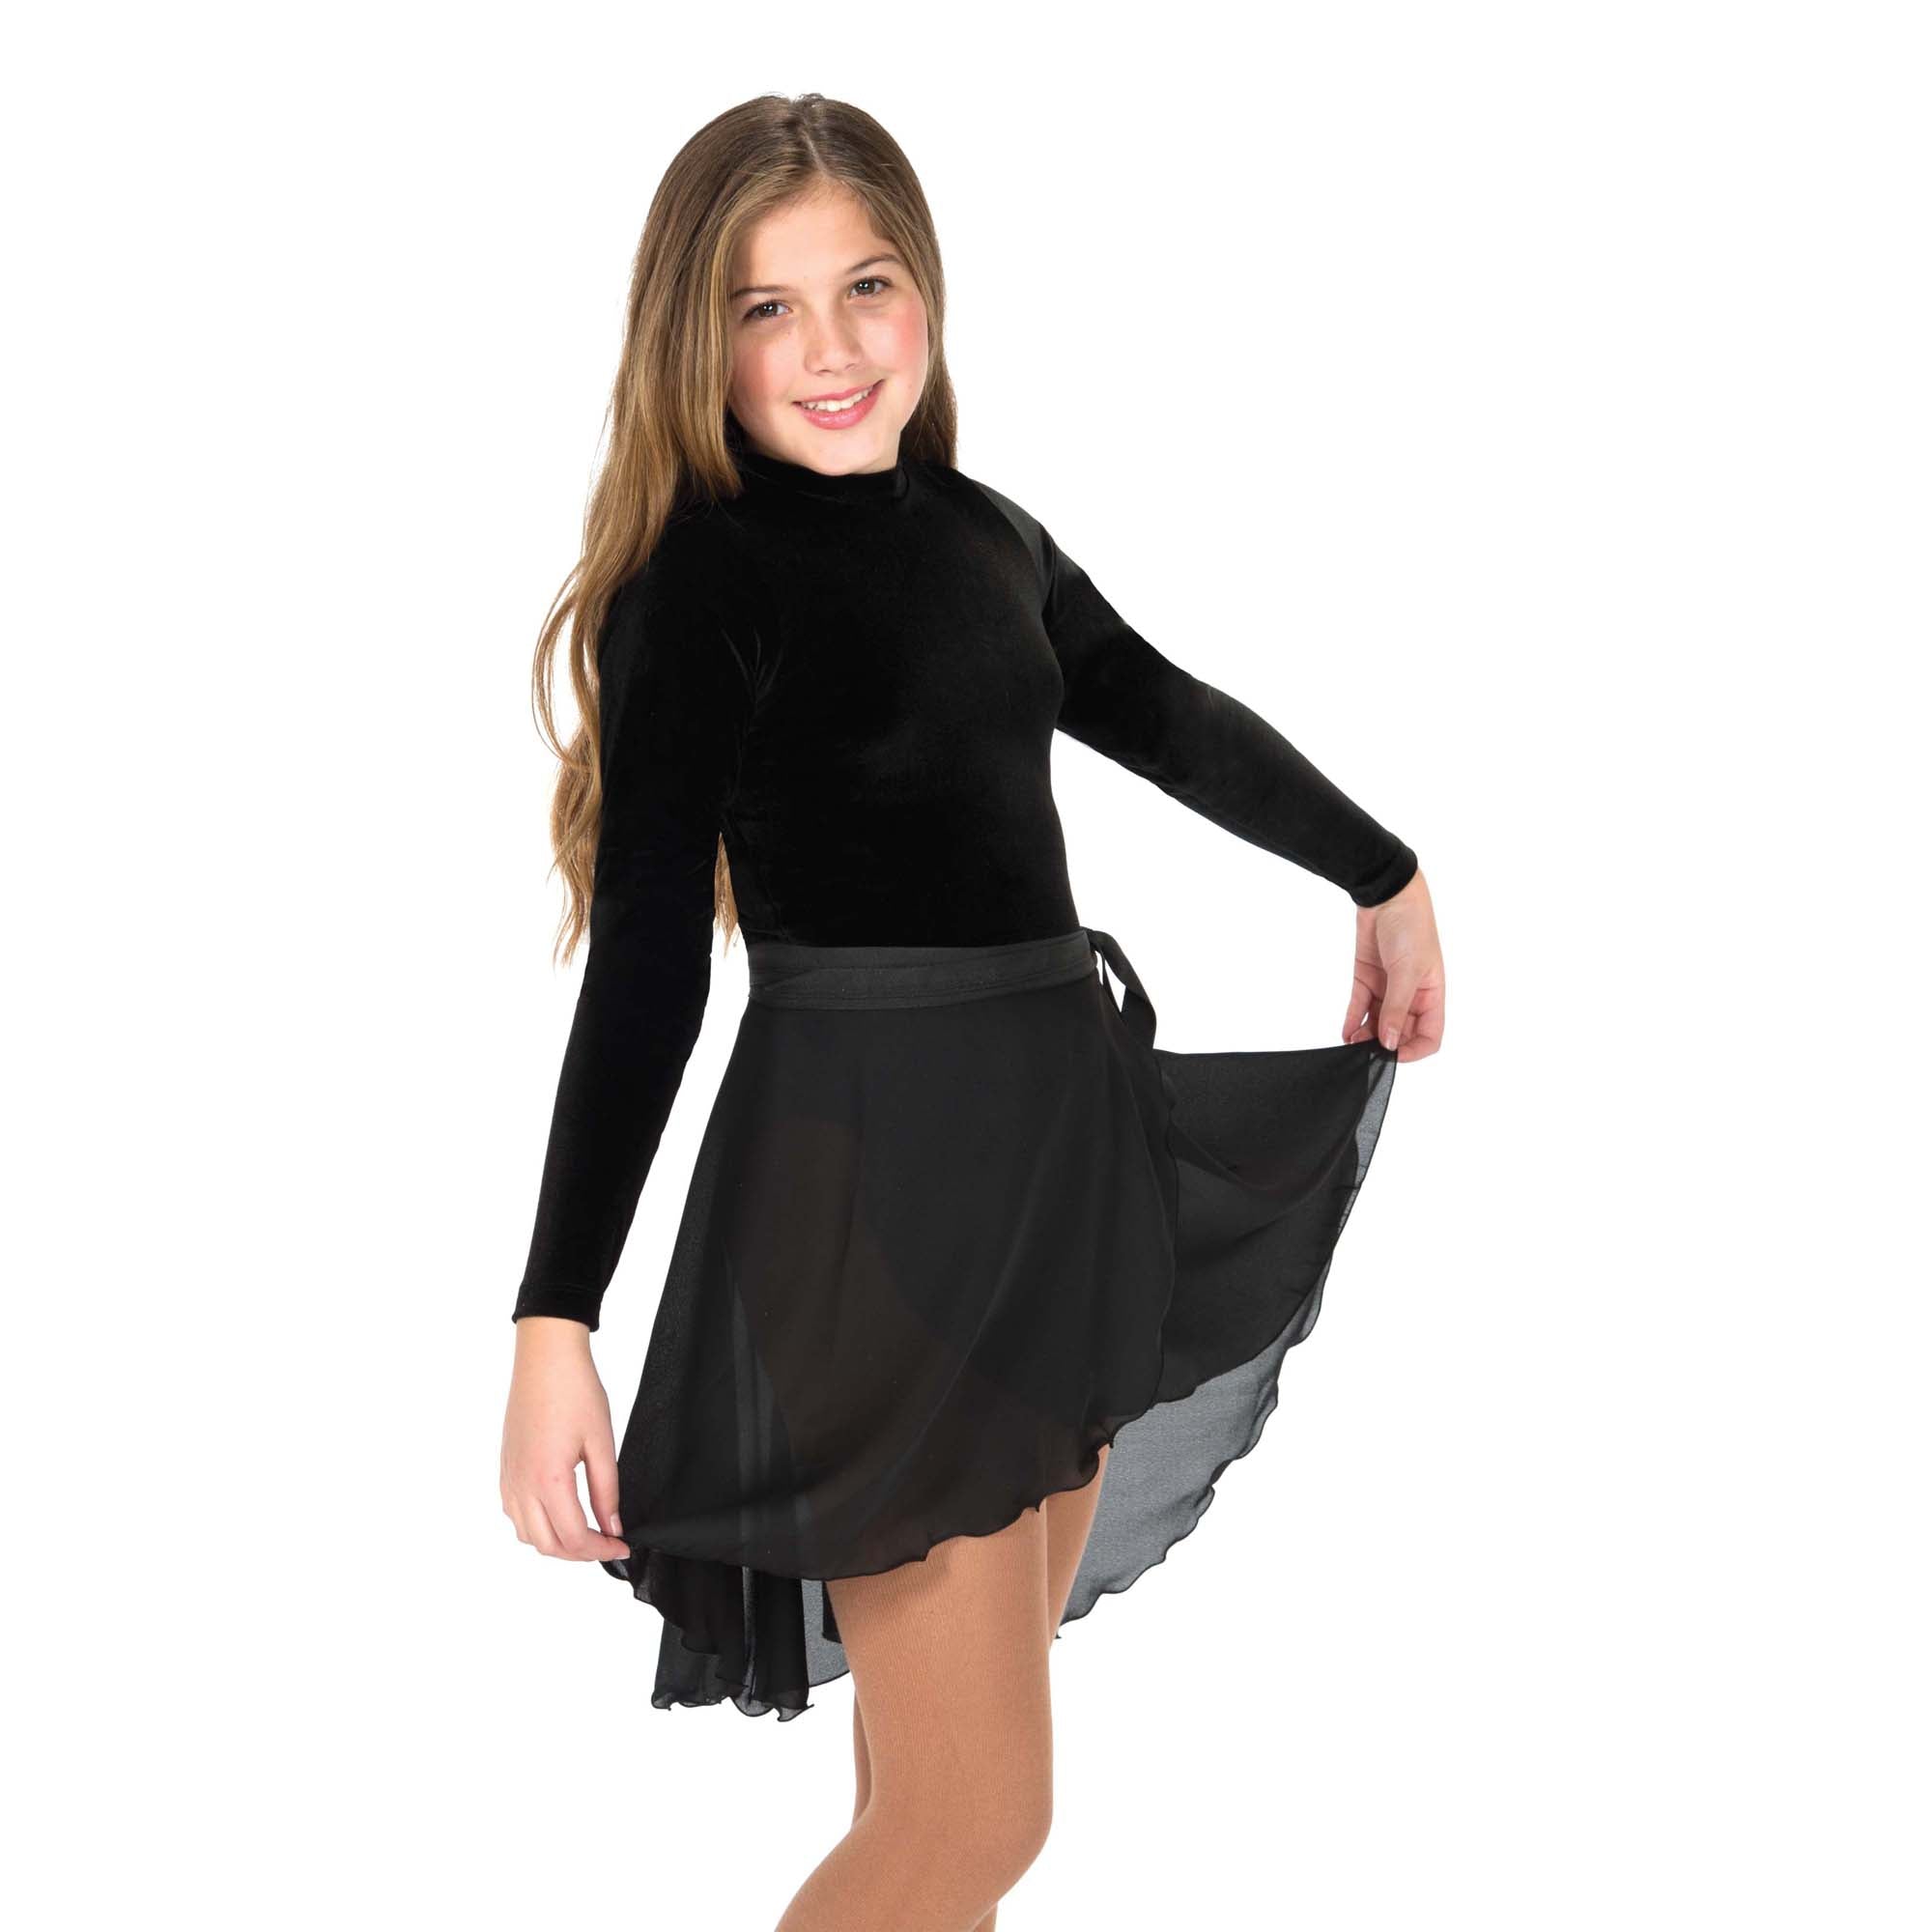 310 Dance Wrap Skirt in Black by Jerry's